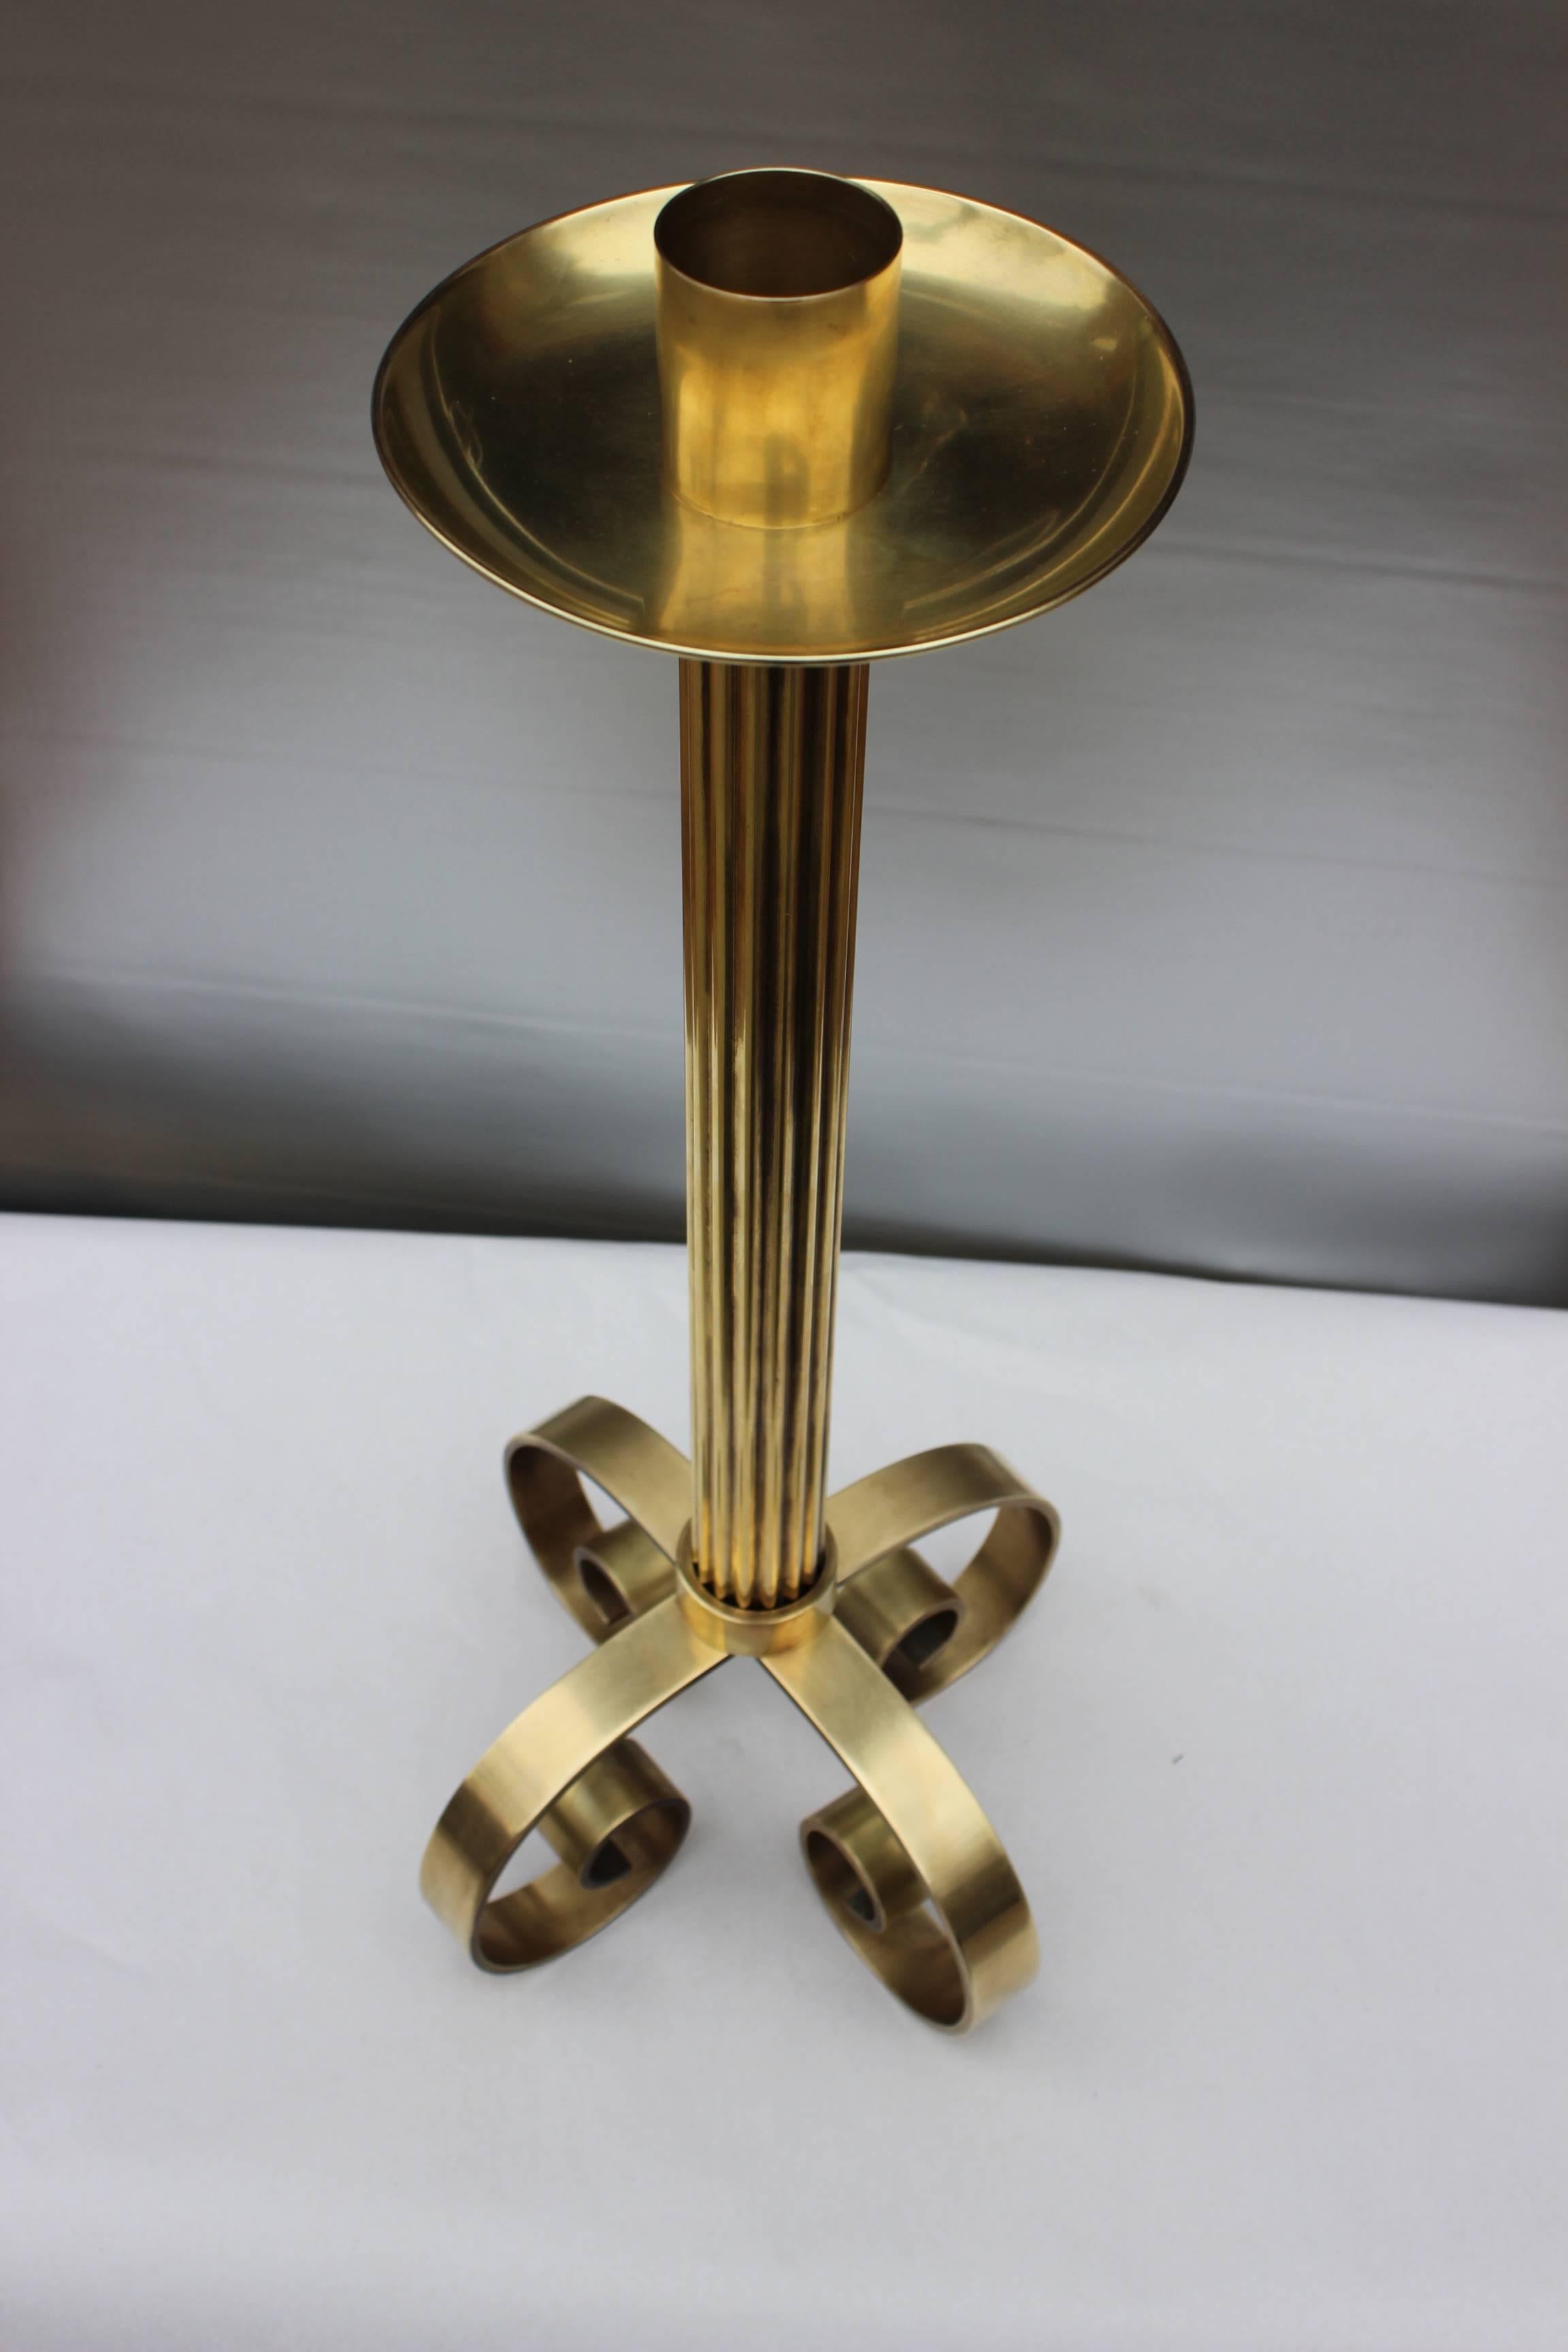 Stunning 1940s Deco style large Swedish brass candle holder by Ystad Metall.